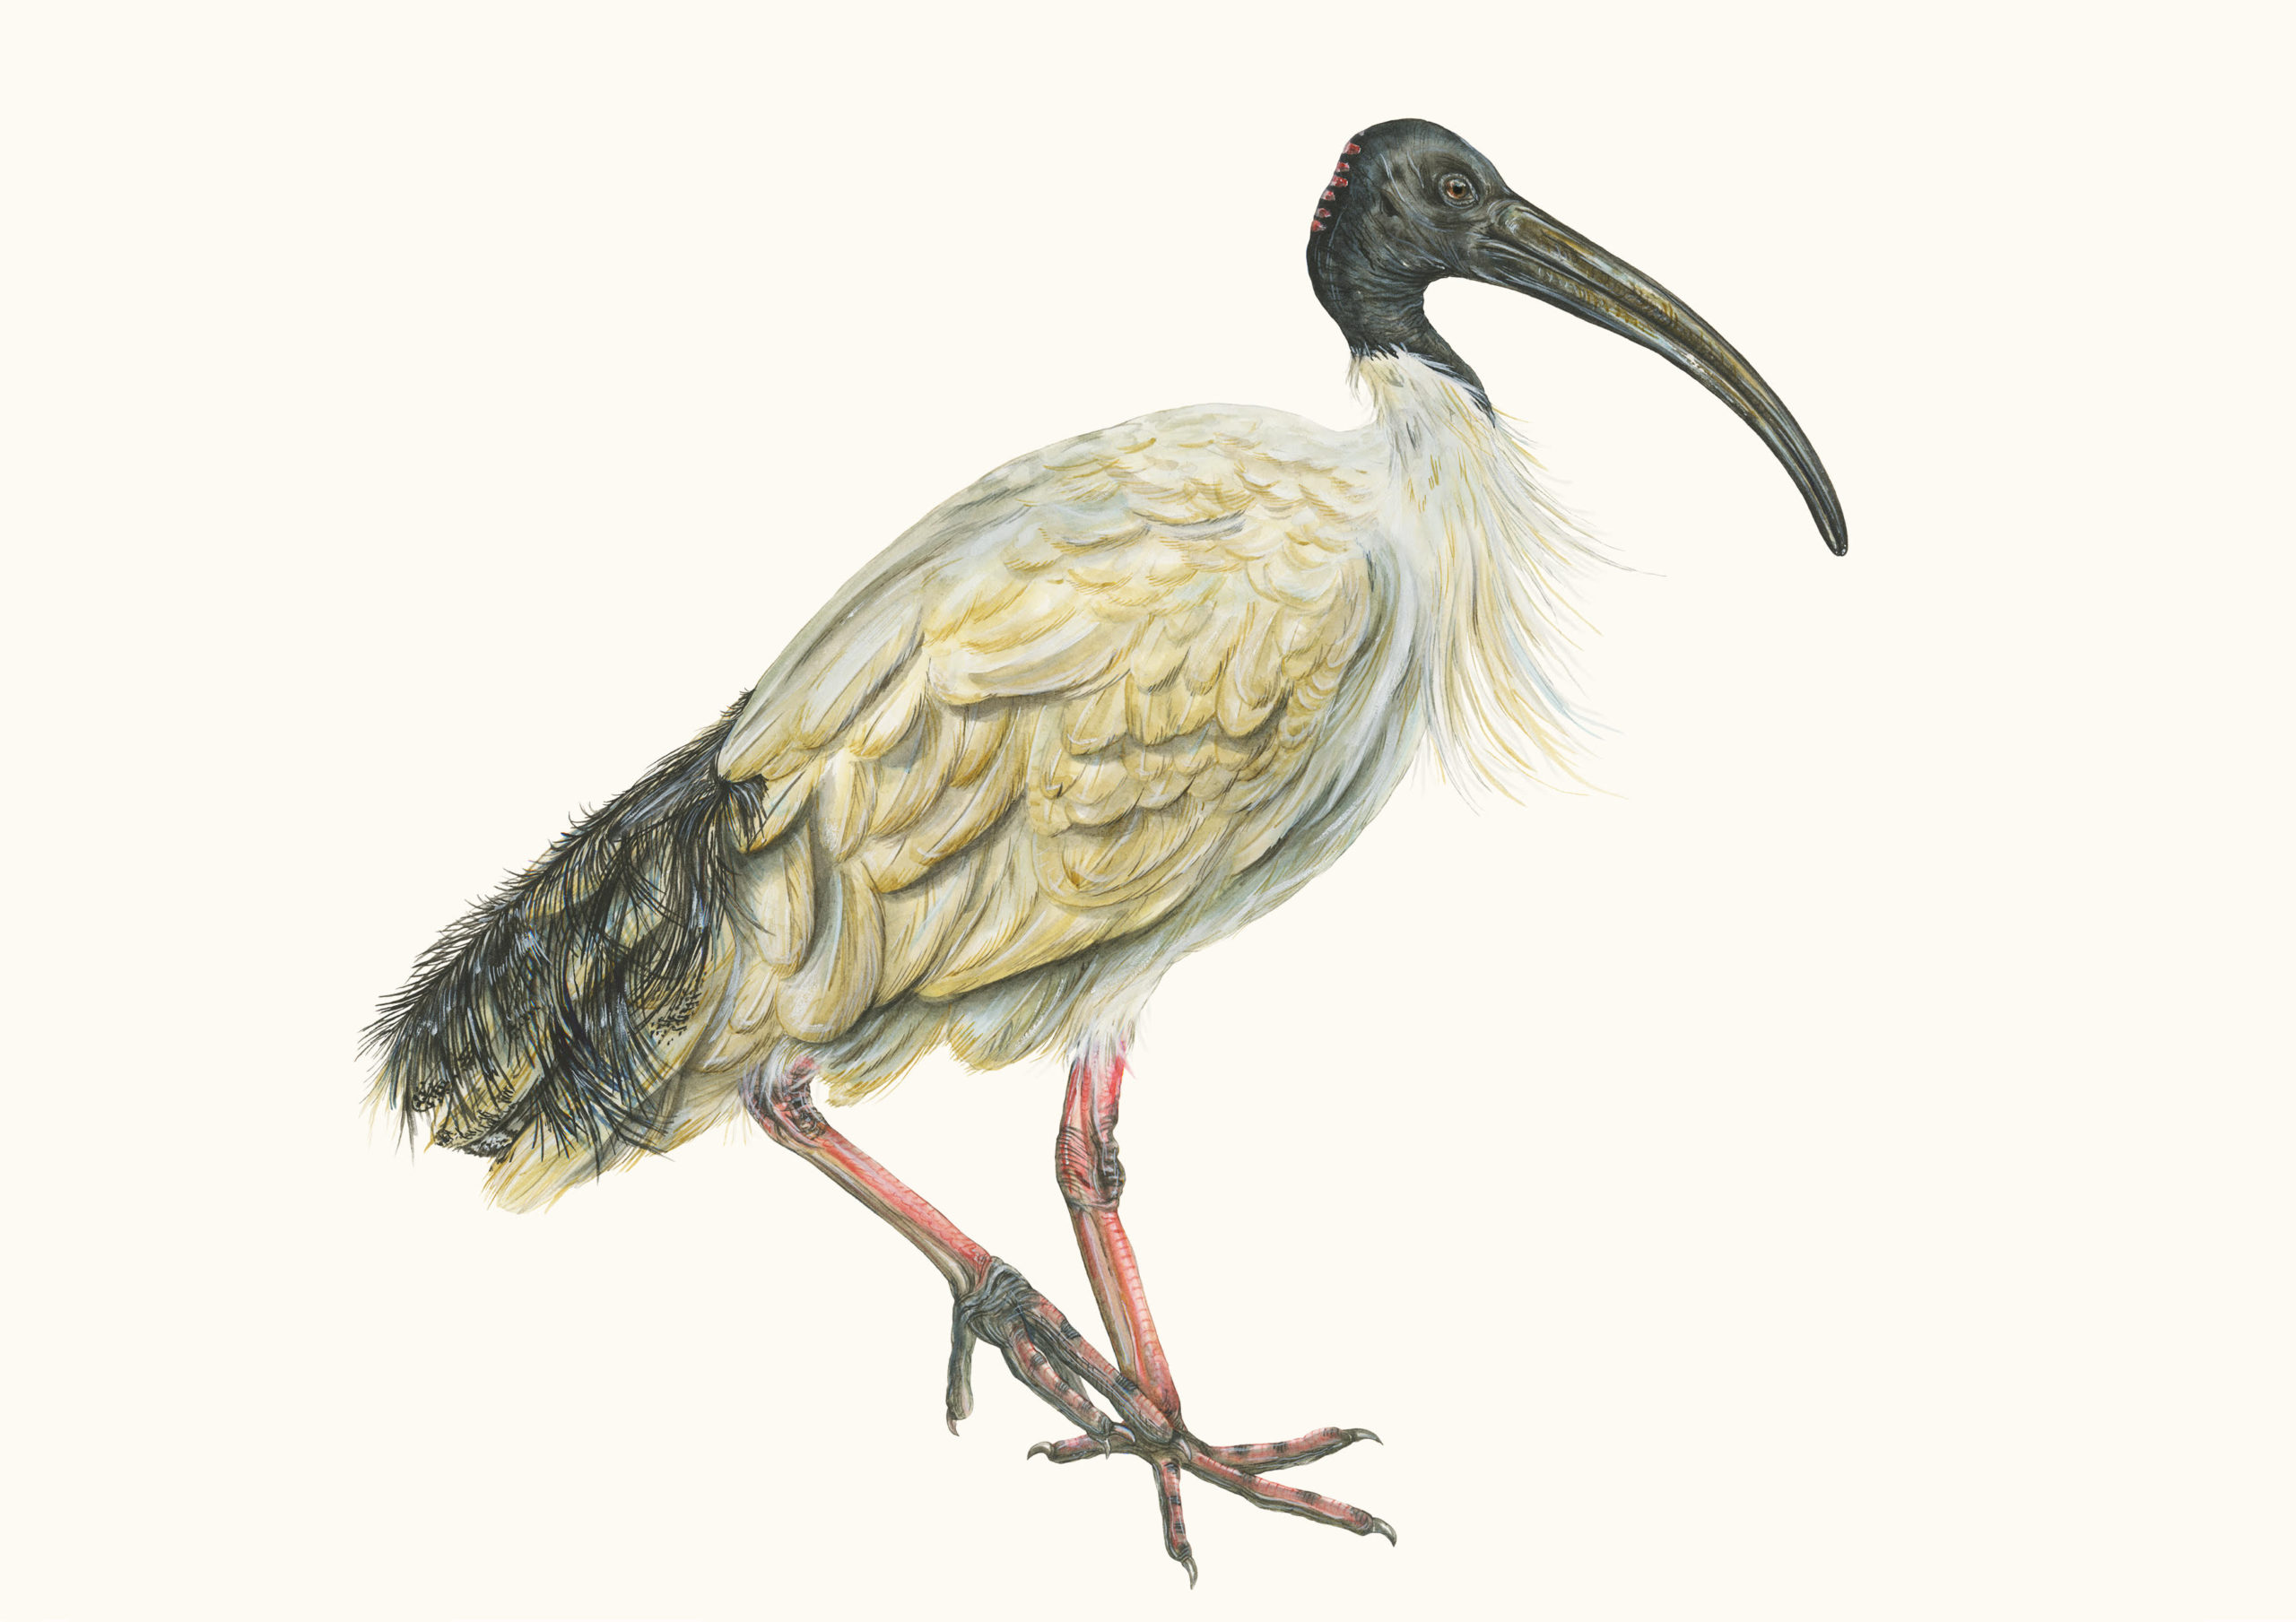 The Australian White Ibis is (more or less) affectionately known as a 'bin chicken' by urban Australians, but it's the bird's foraging skills that have allowed it to adapt and survive as its natural habitats become less inhabitable. Image provided by Sami Bayly.